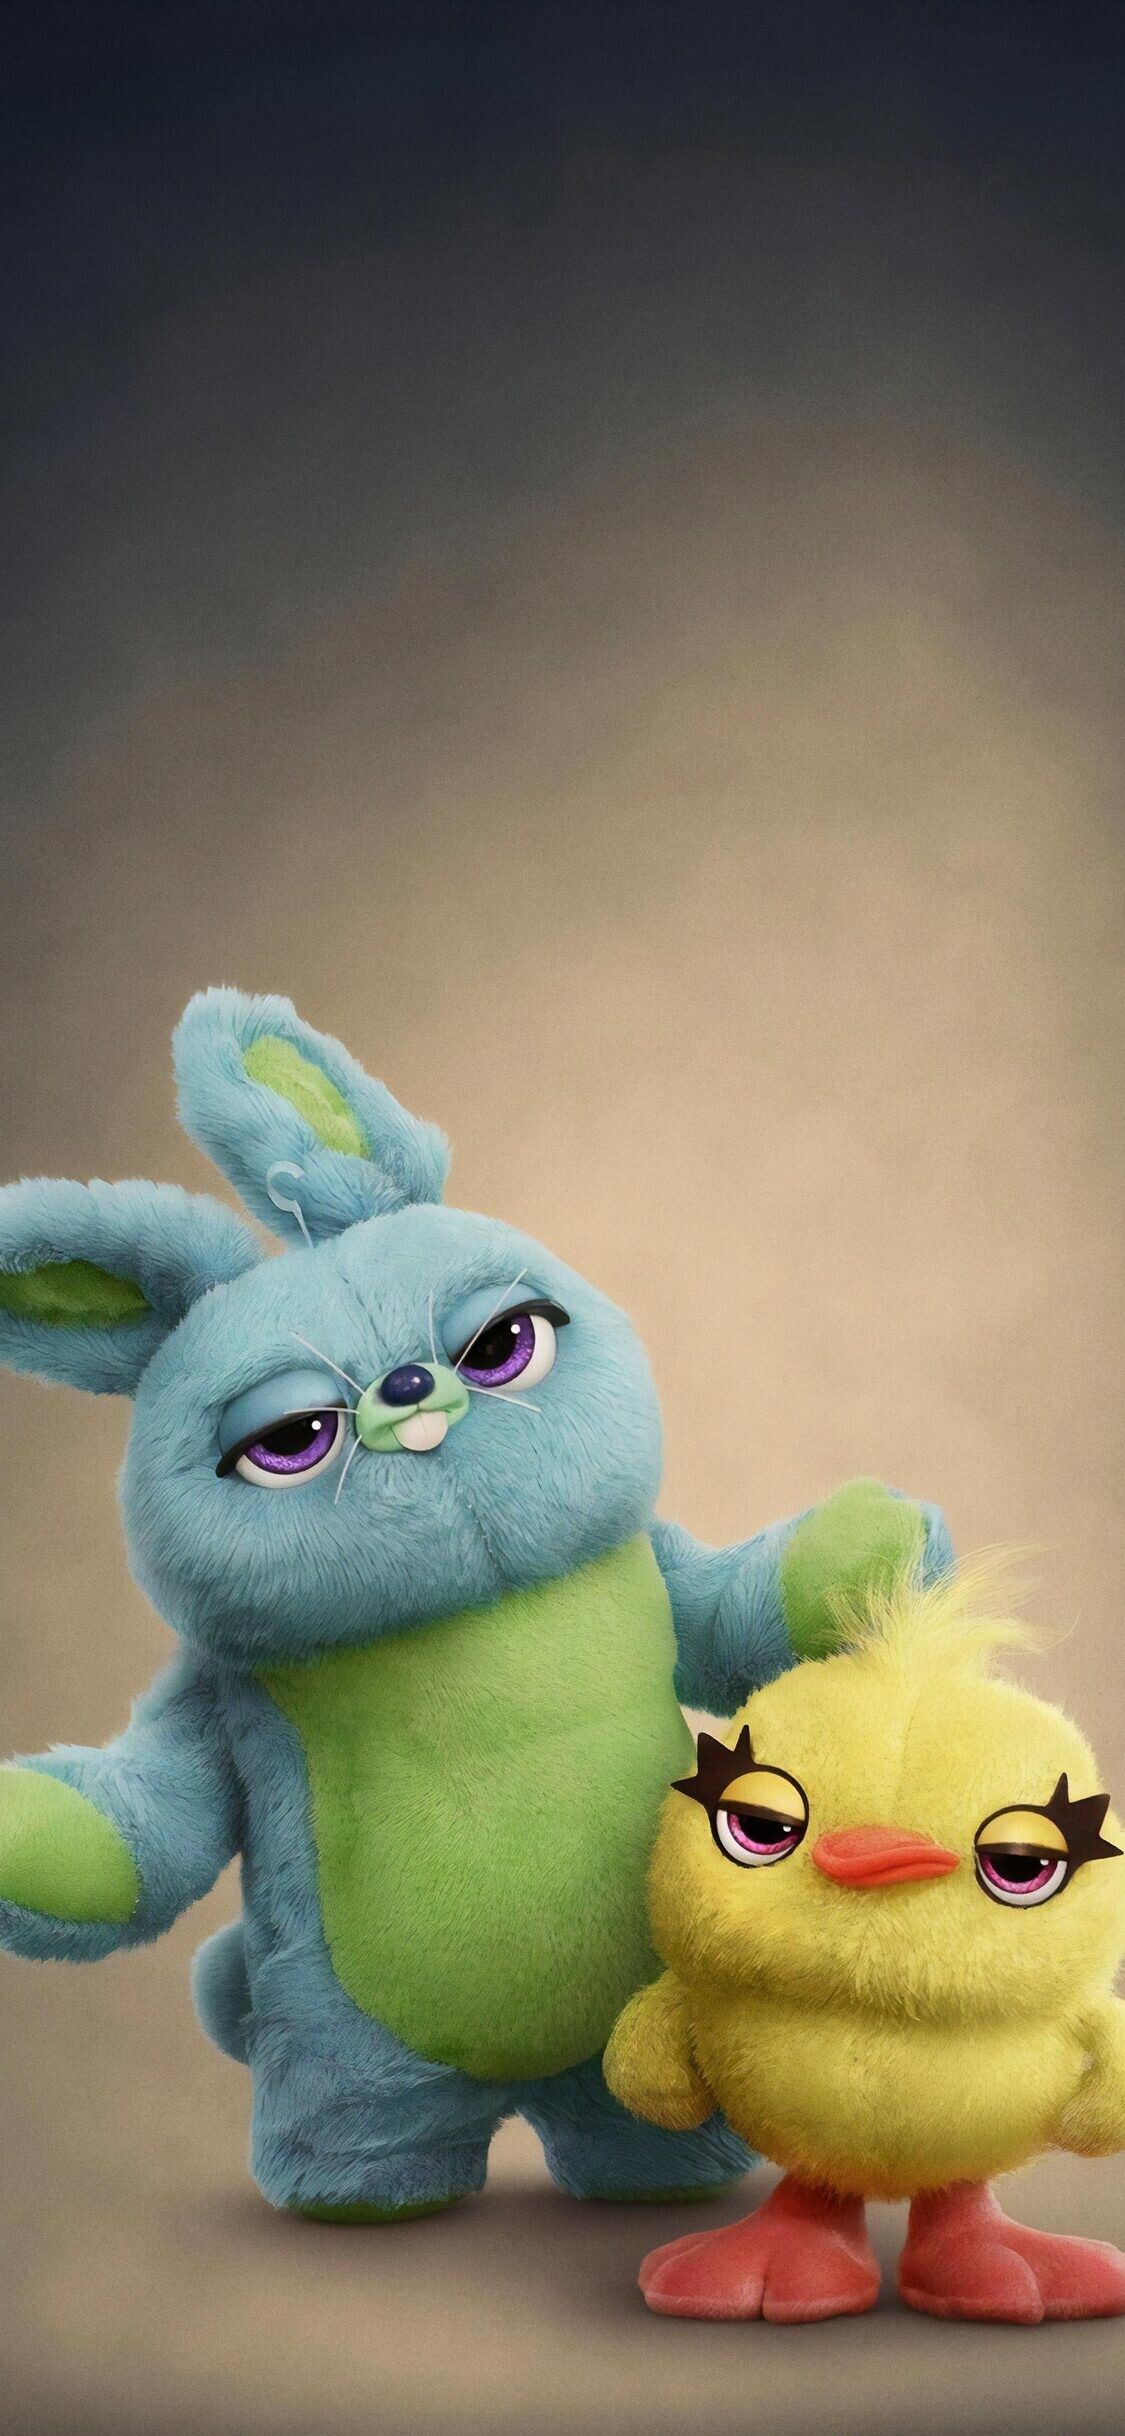 Toy Story: Ducky, a stuffed duck and Bunny, a blue and green stuffed bunny. 1130x2440 HD Wallpaper.